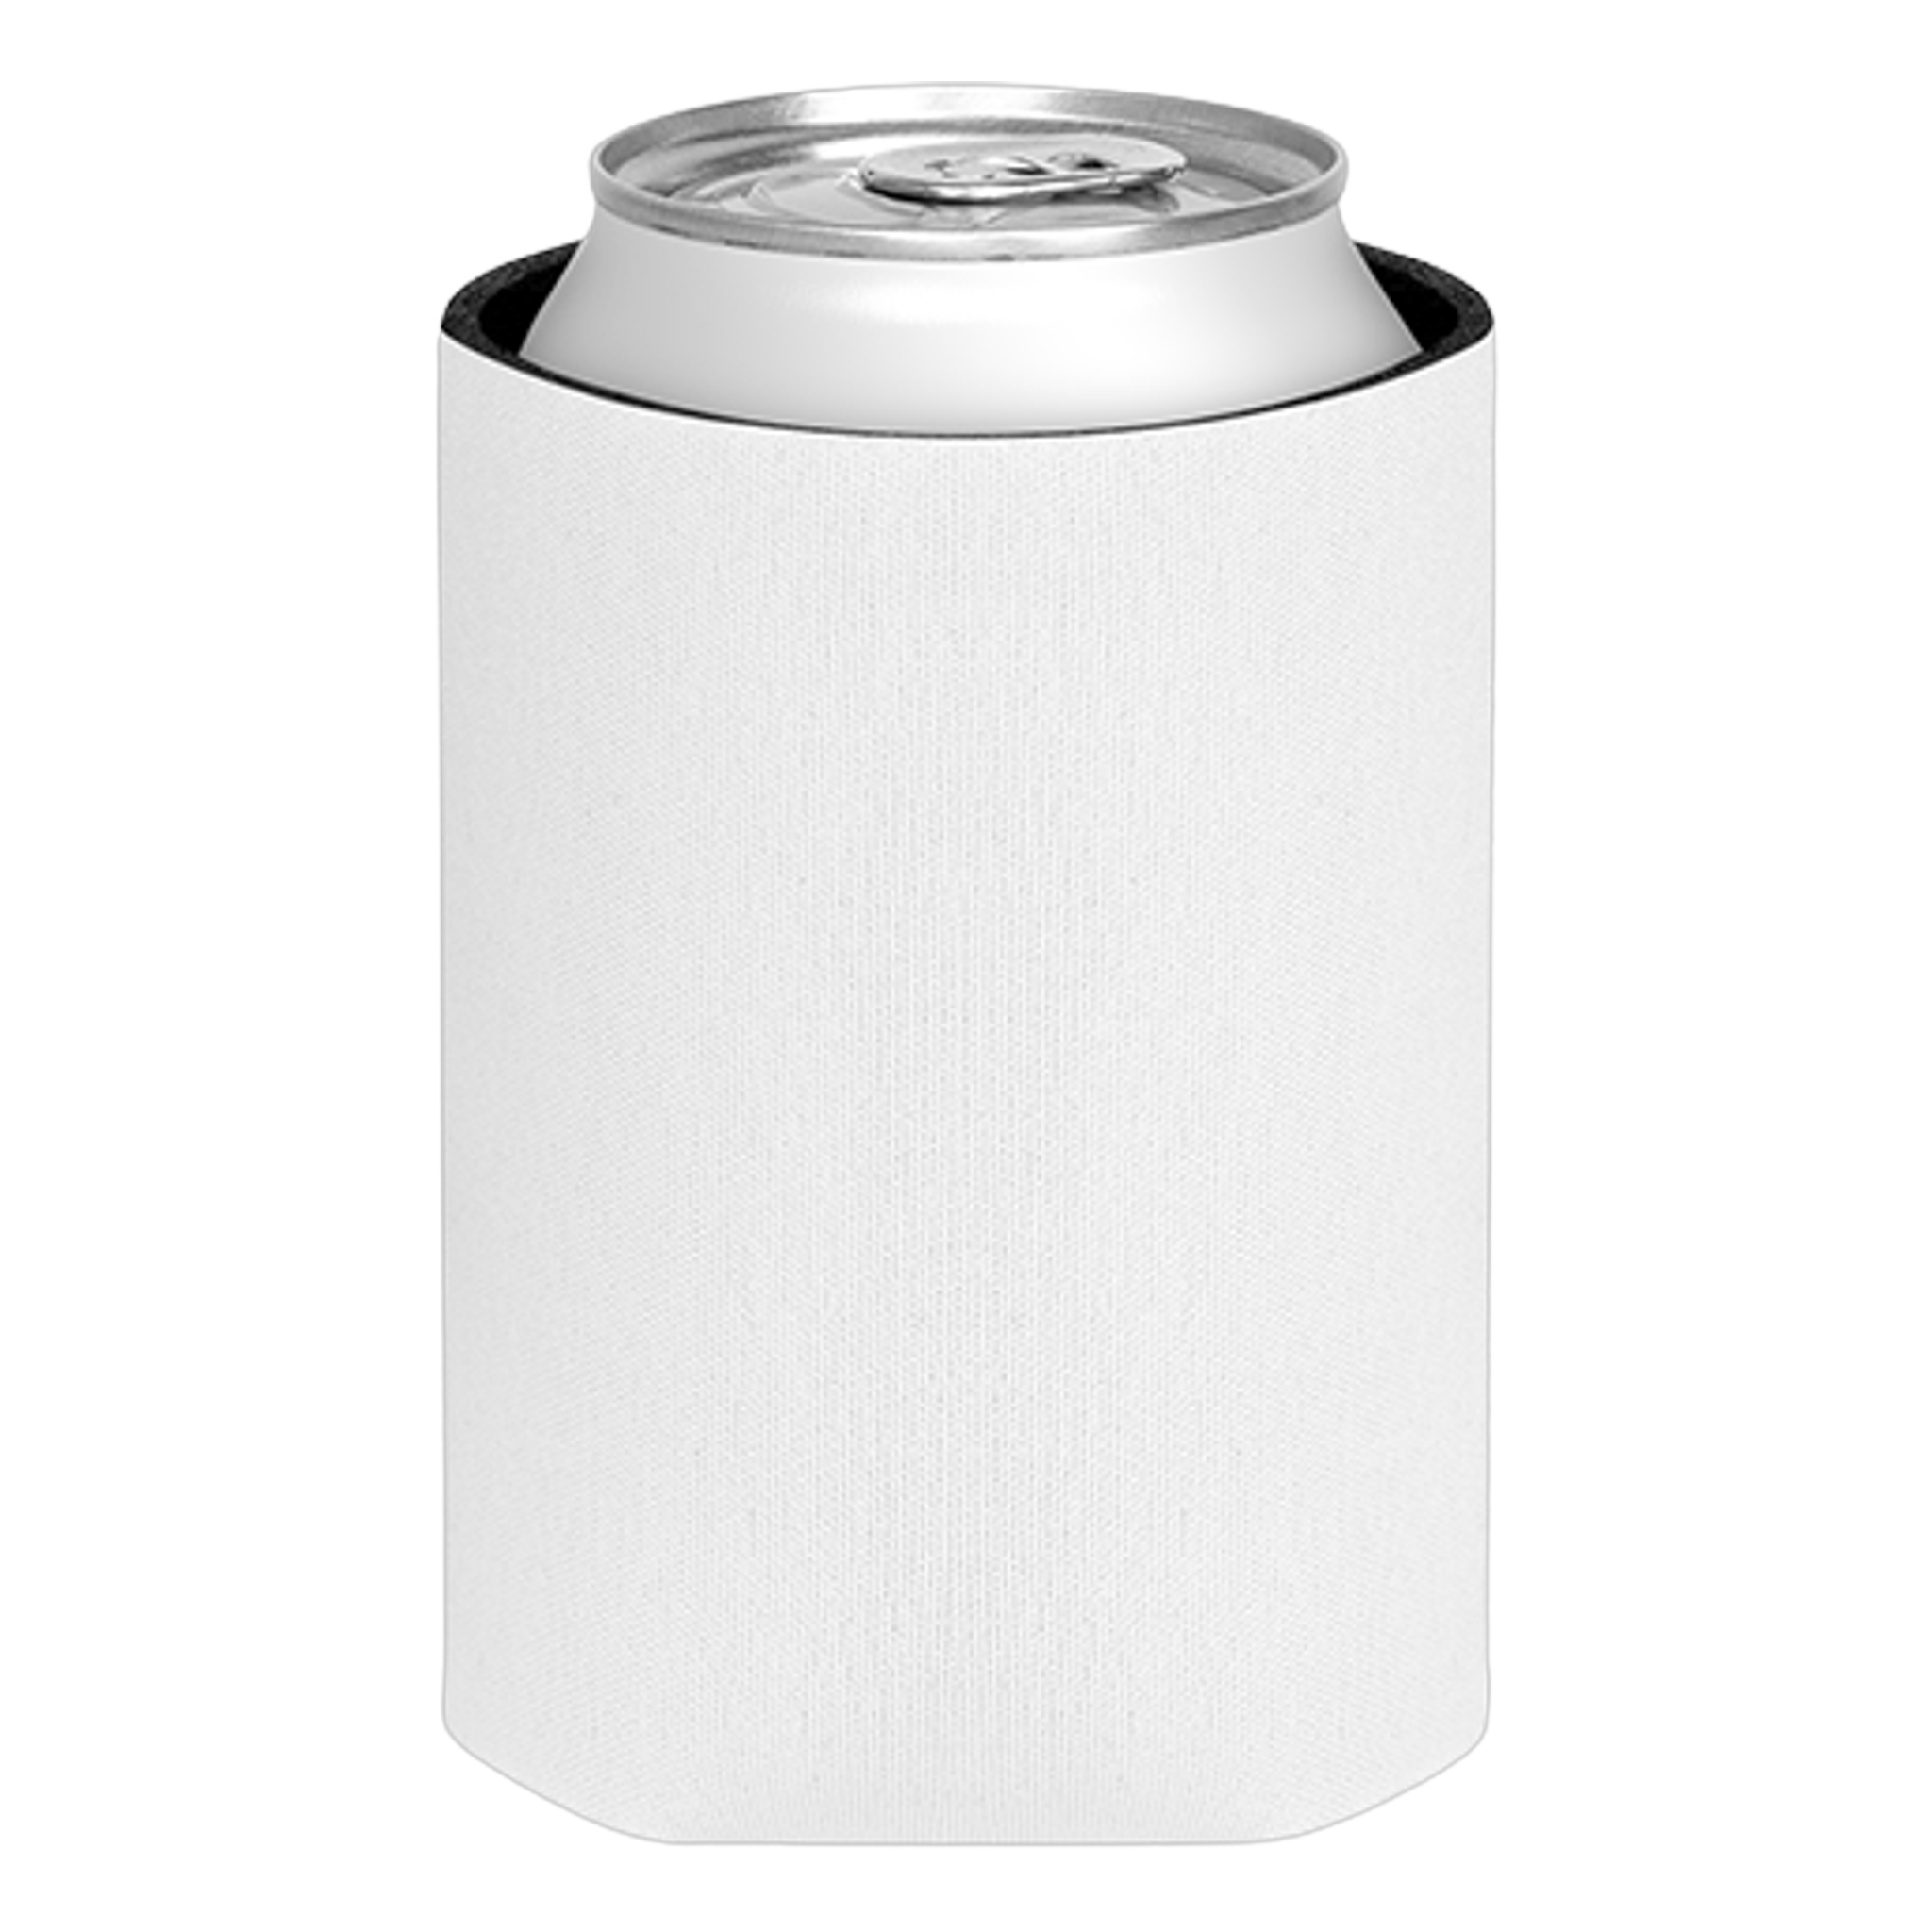 CANCOOLER.White:Slim Can.TCP